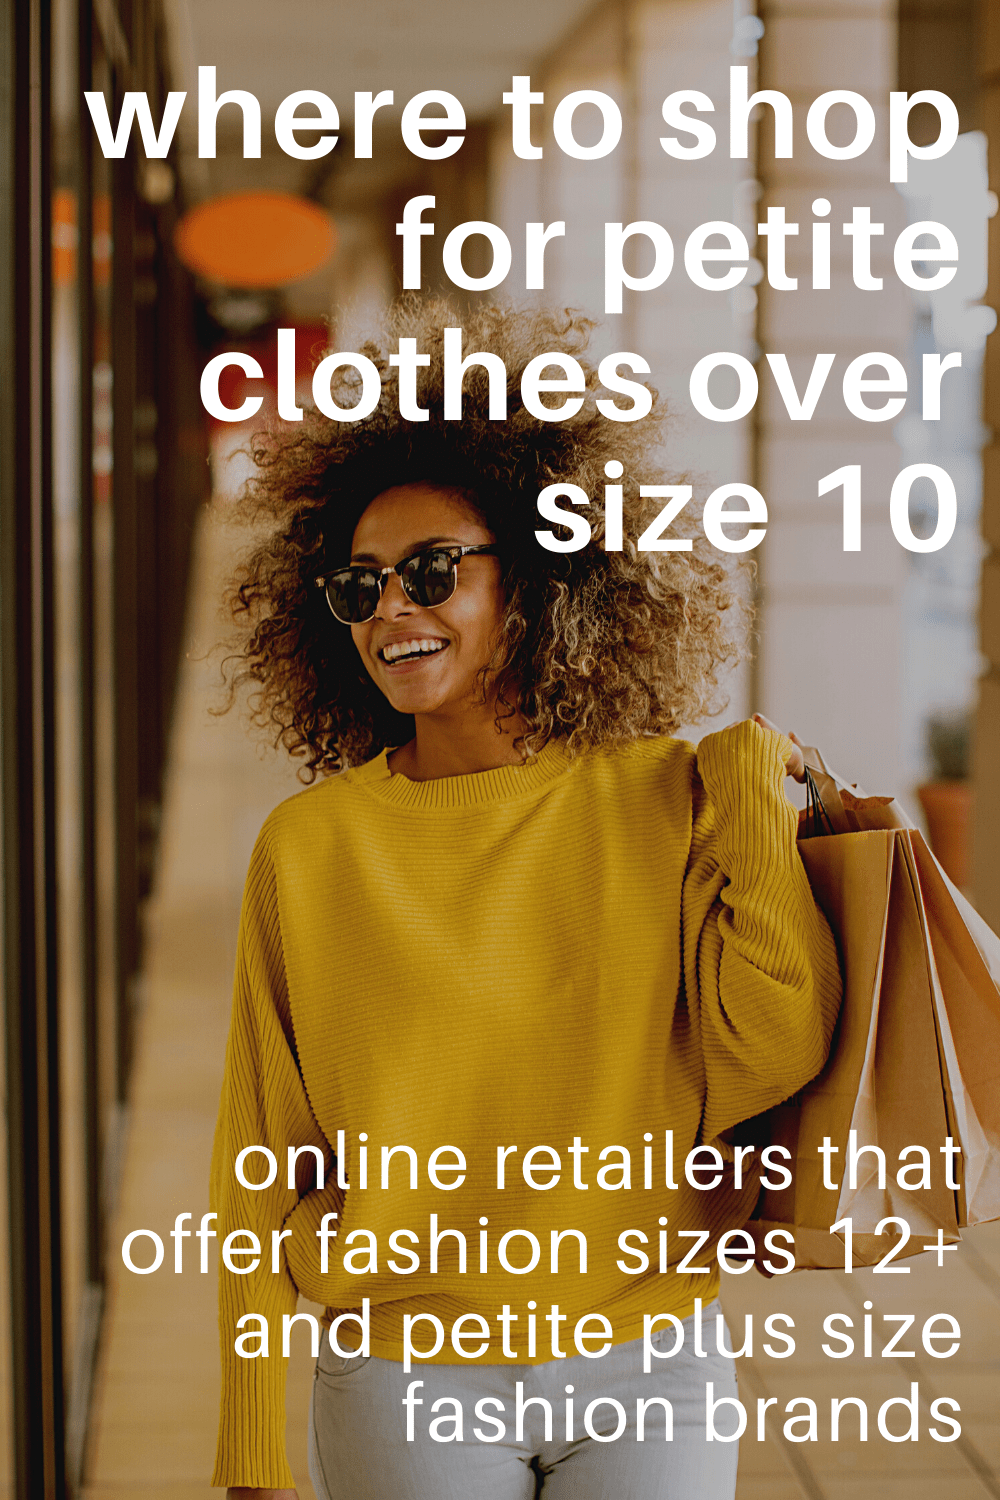 The 39 Best Stores that Offer Petite Clothes Over Size 10 - Wardrobe Oxygen